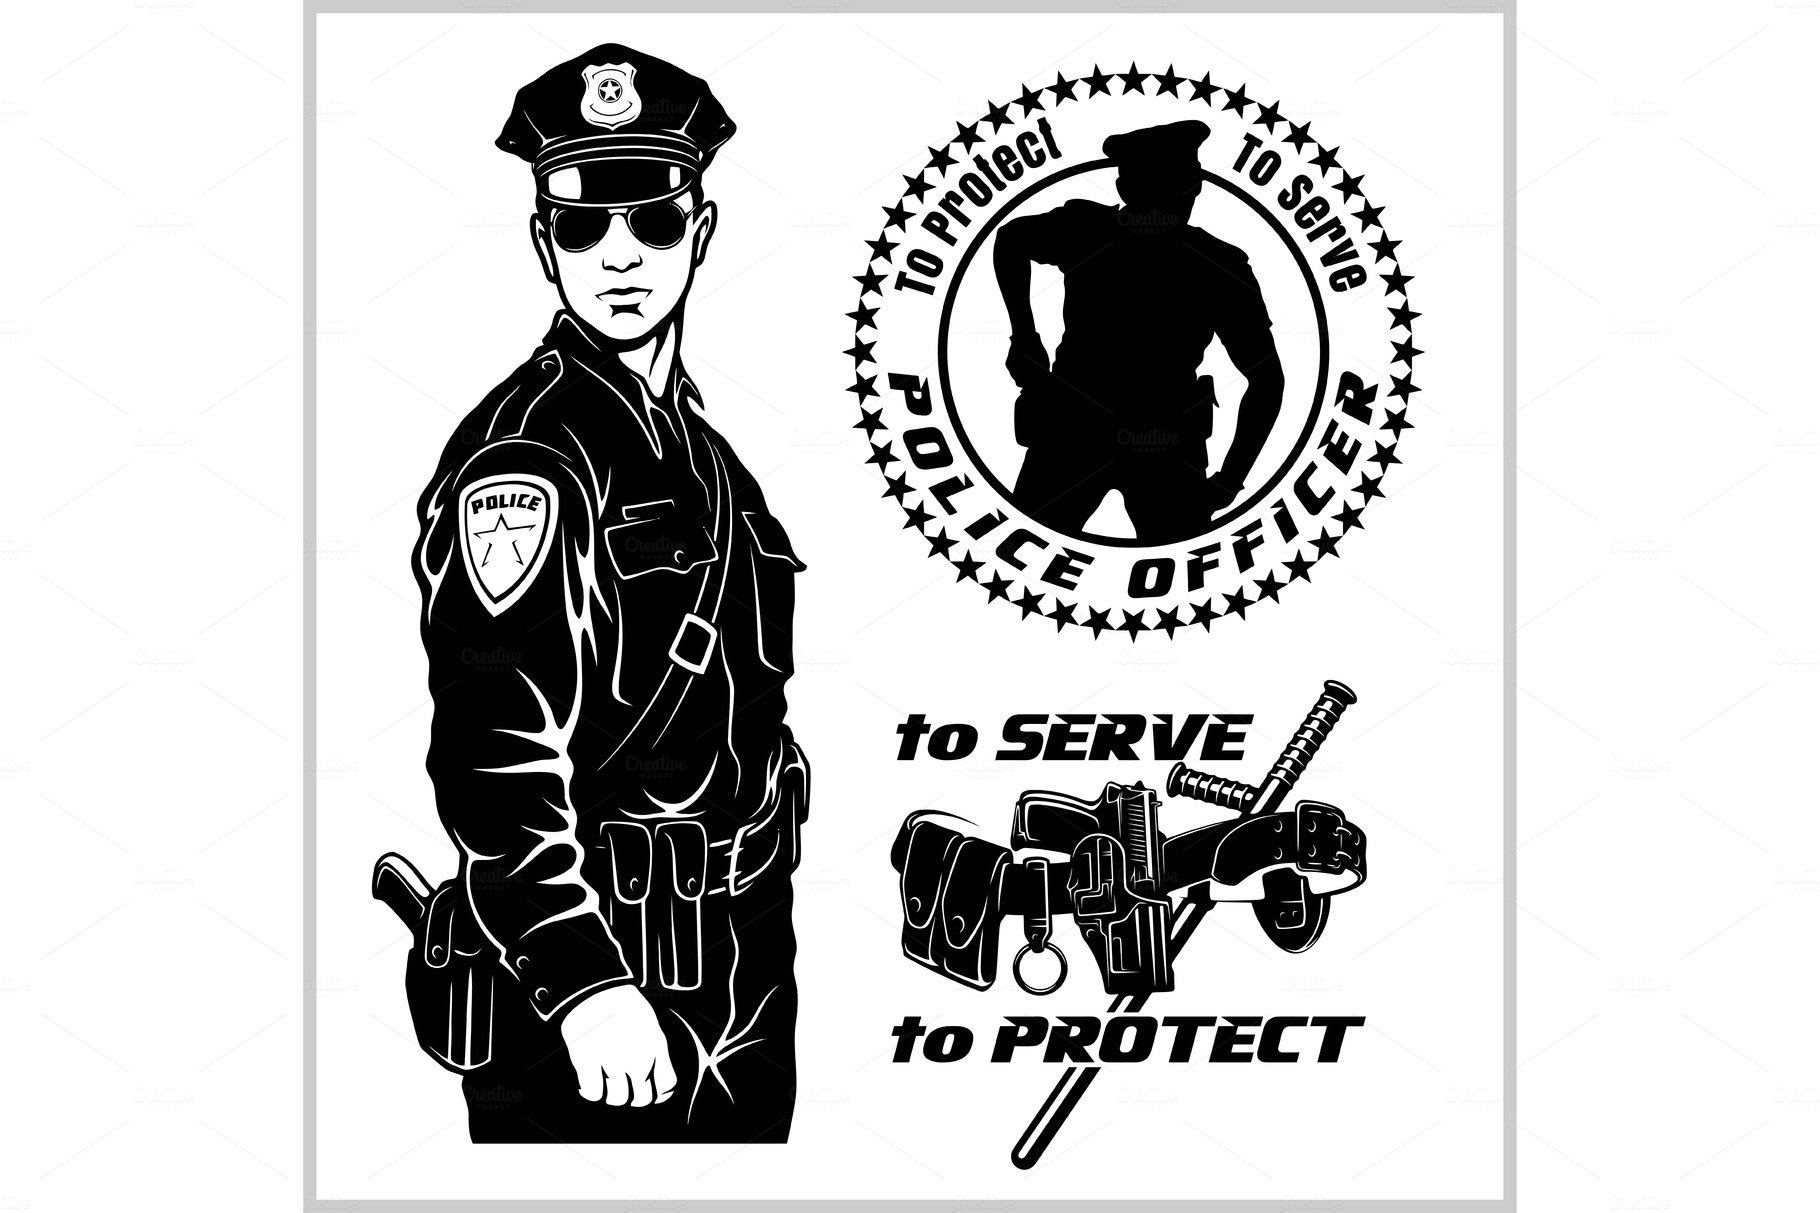 Police man - Police badges and cover image.